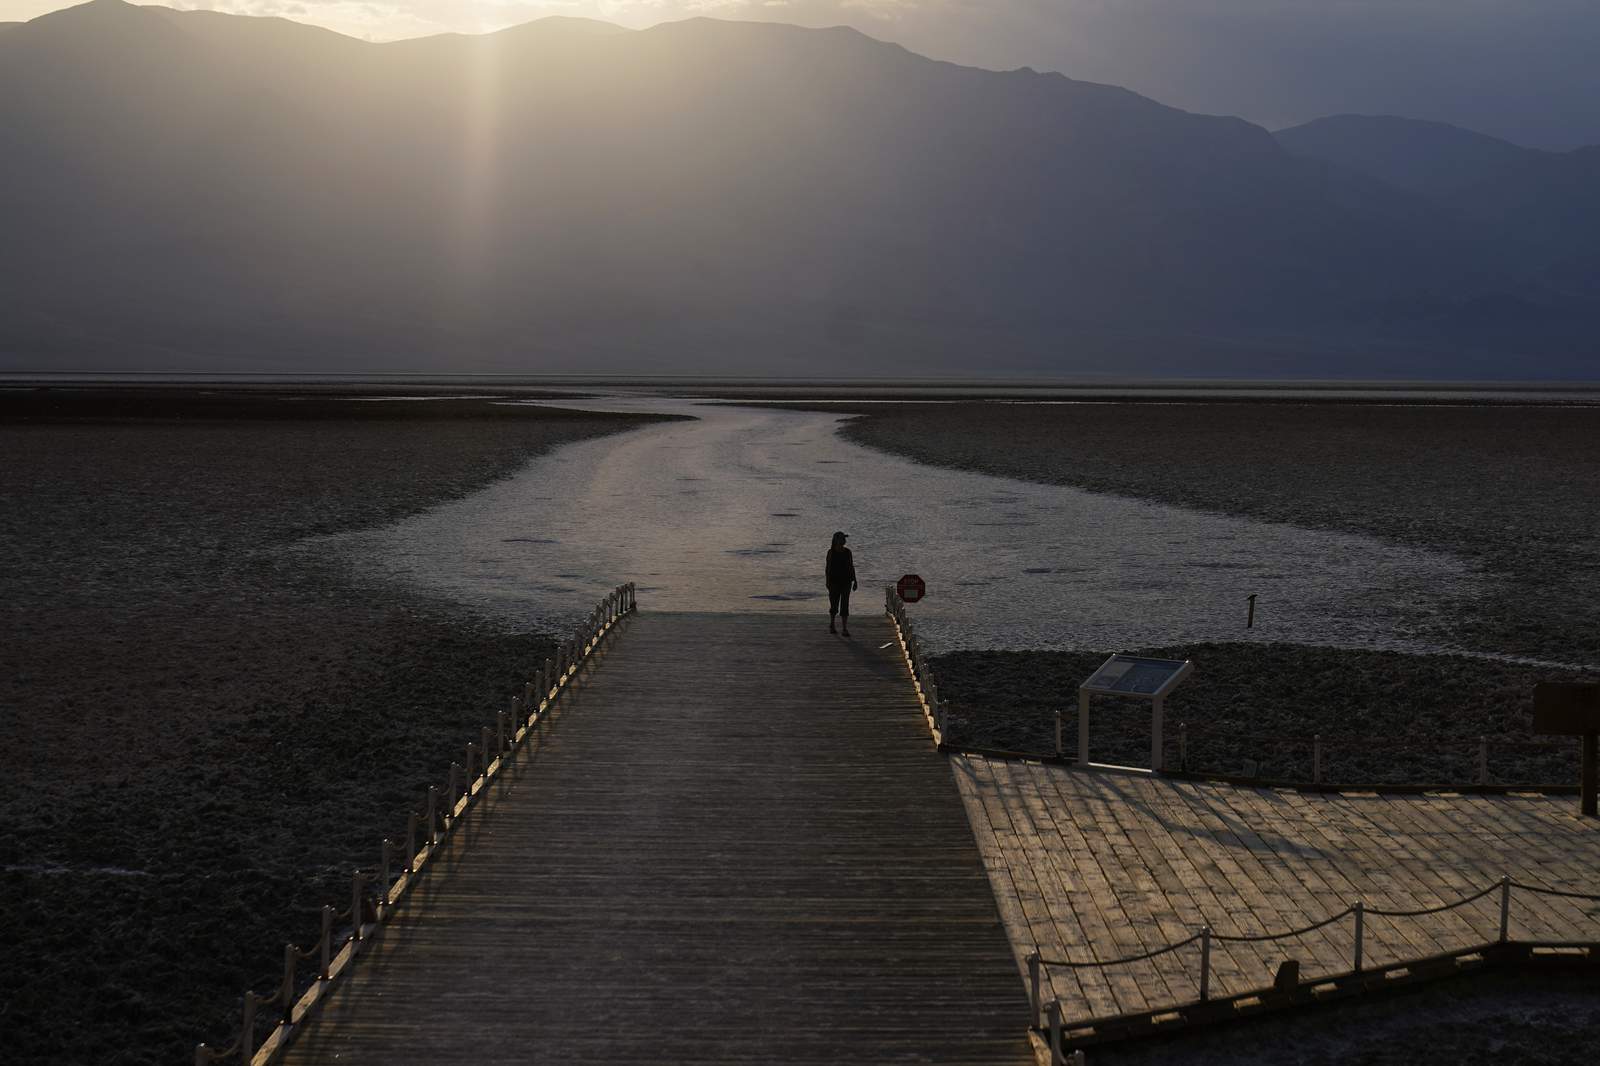 Death Valley's brutal 130 degrees may be record if verified